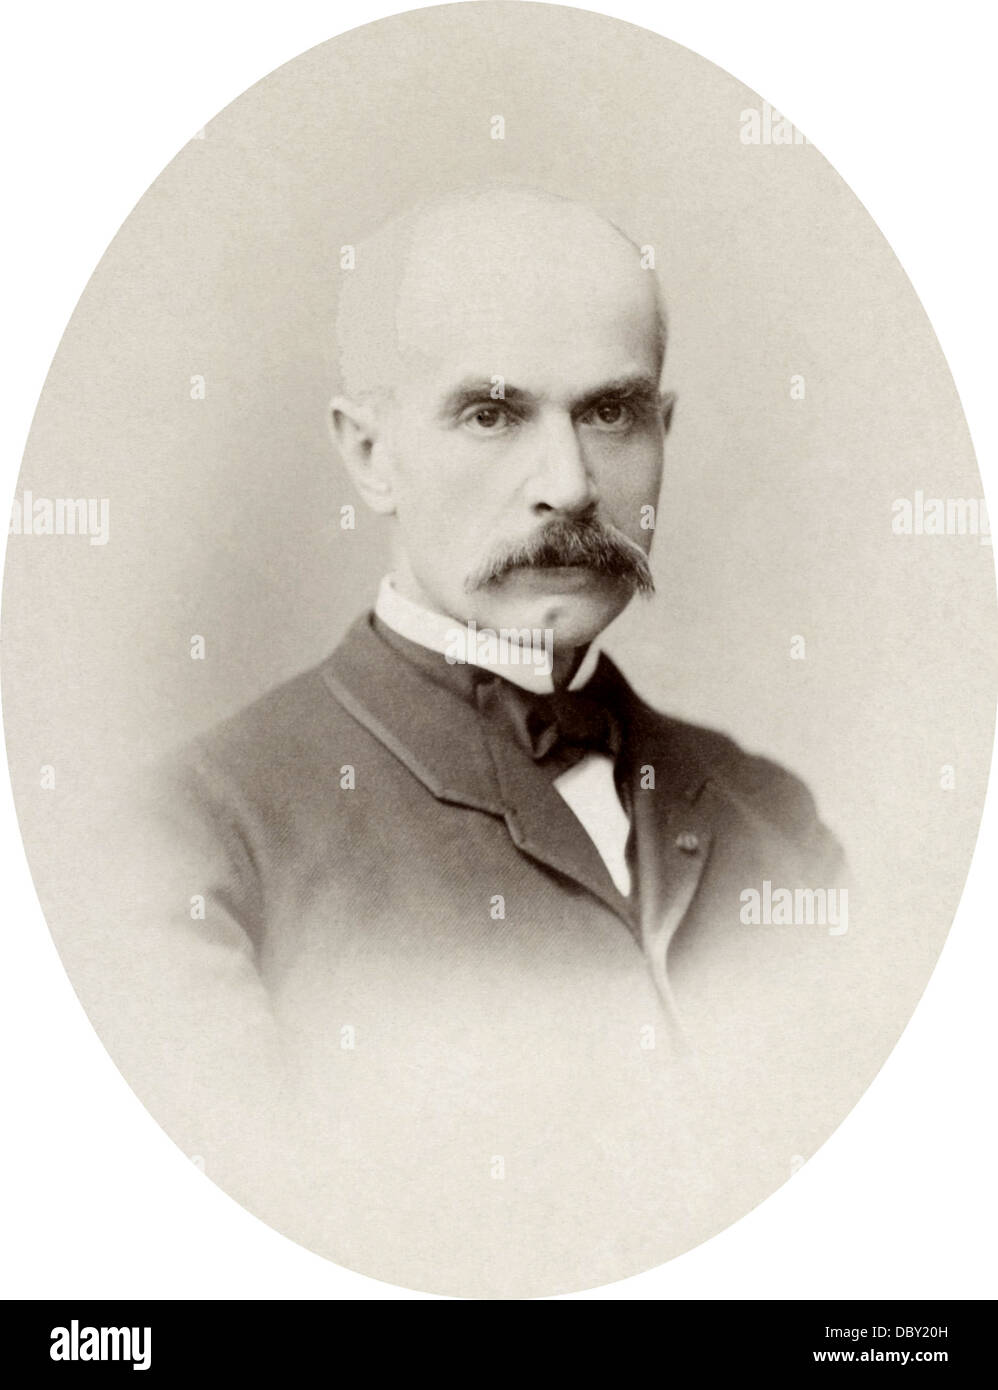 Charles Le Myre de Vilers (1833 - 1918), french explorator and colonial administrator. Stock Photo